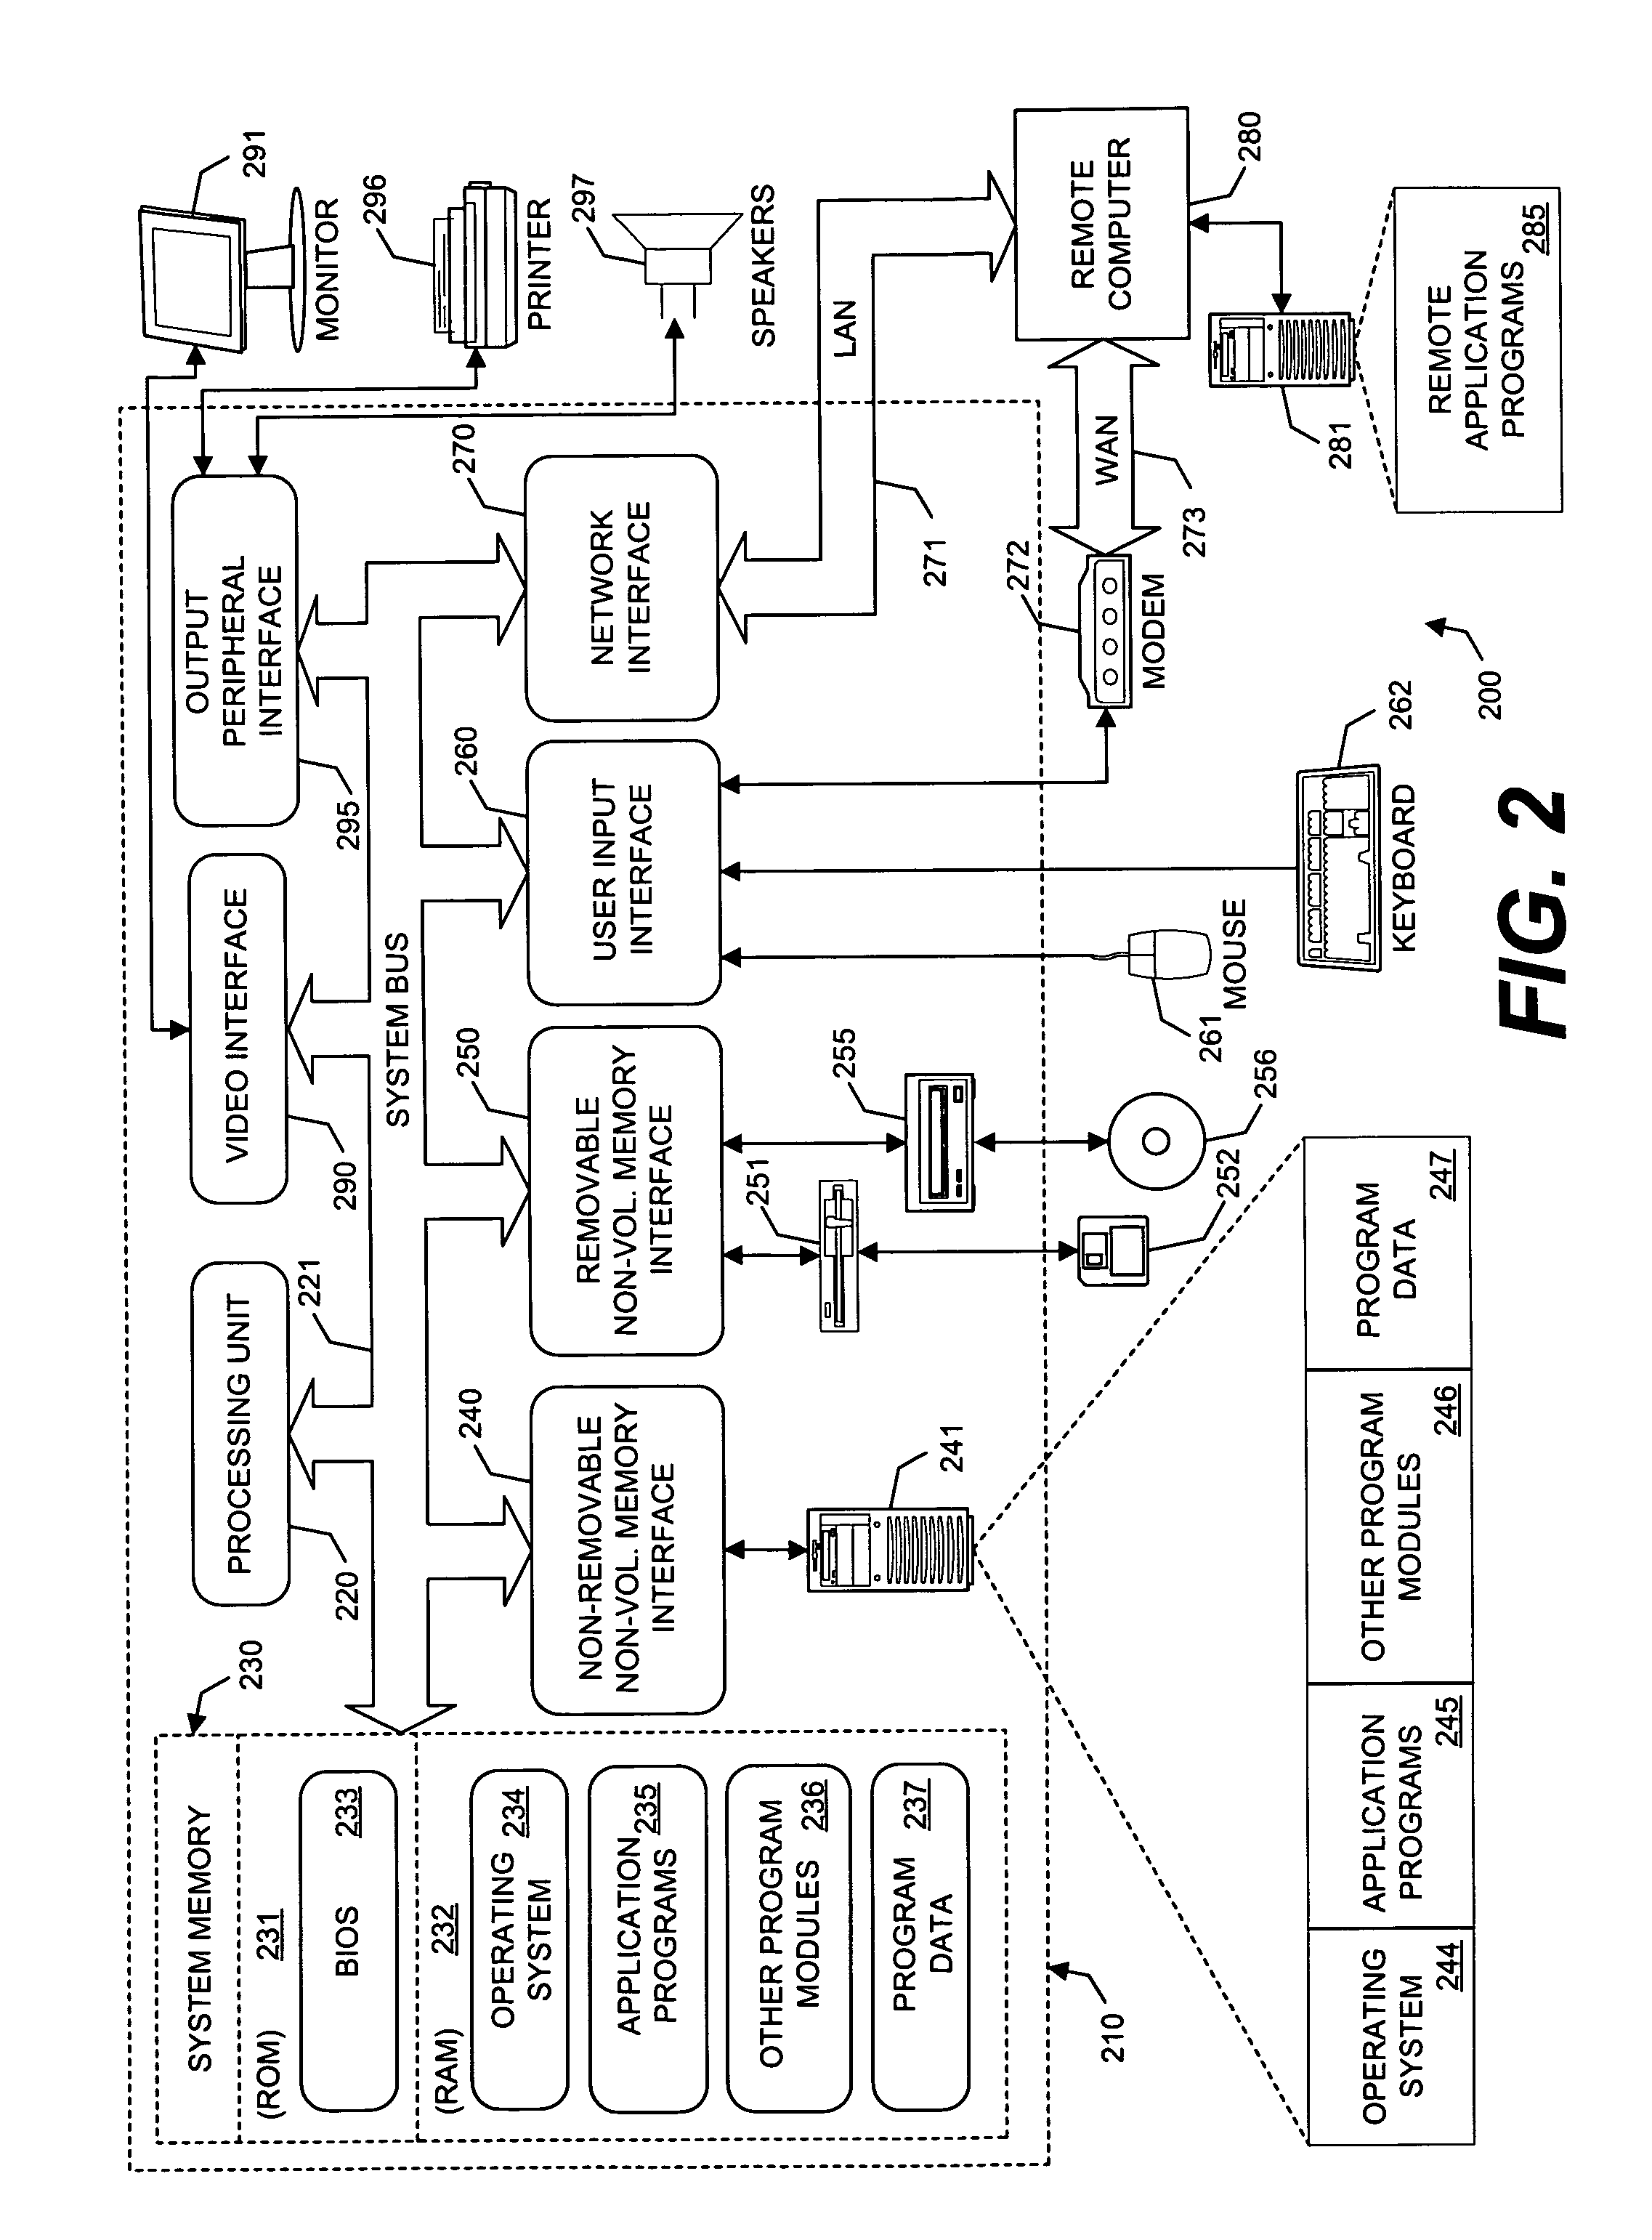 System and methods for sharing configuration information with multiple processes via shared memory